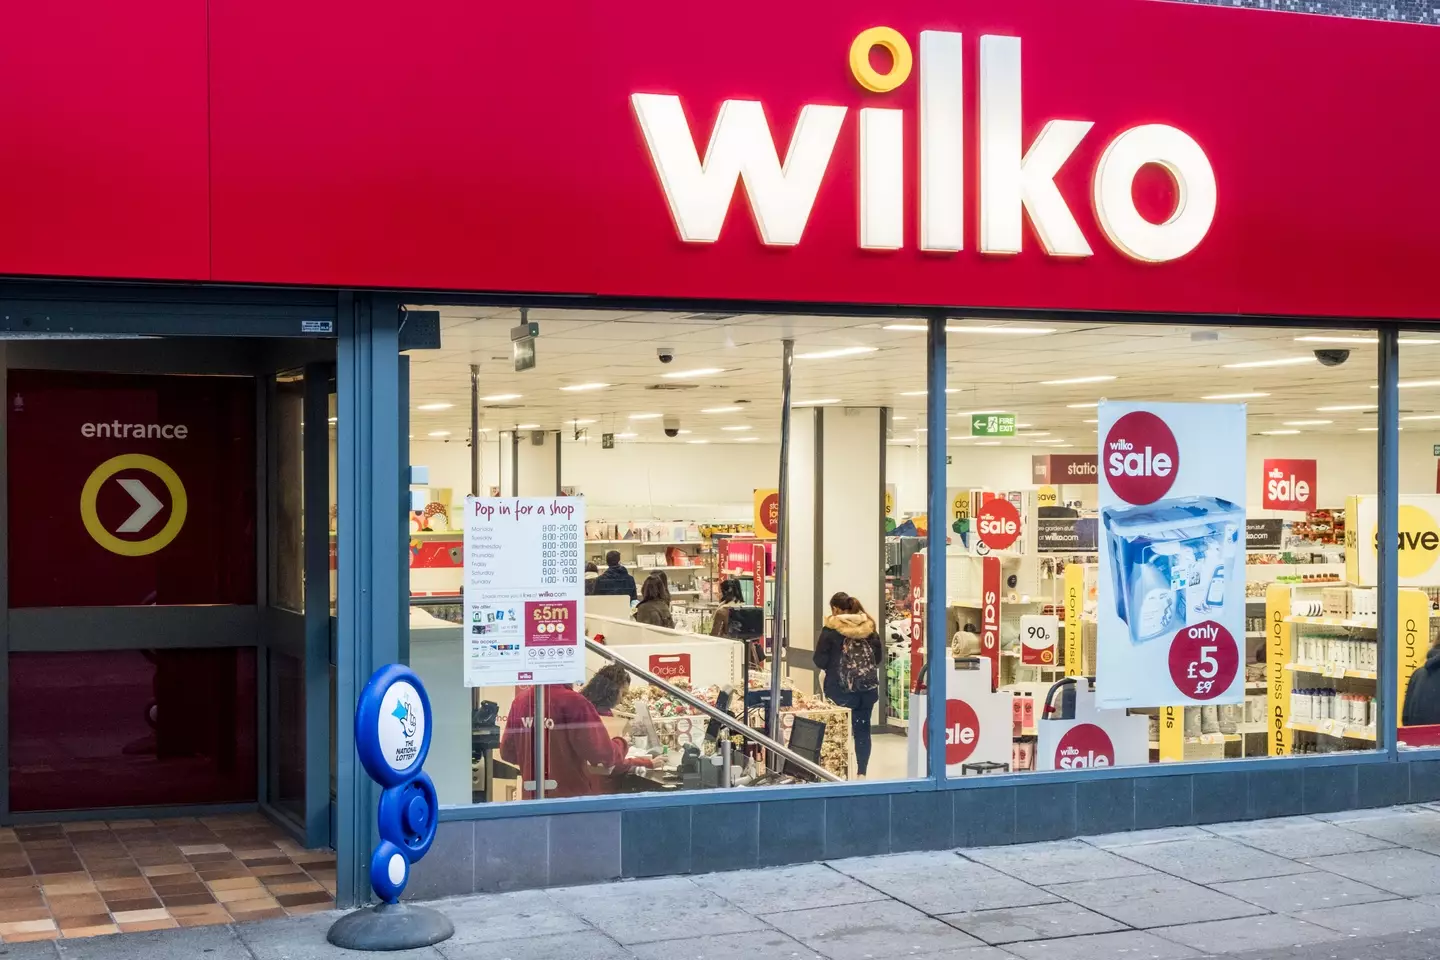 One woman got much more than she bargained for at Wilkos.